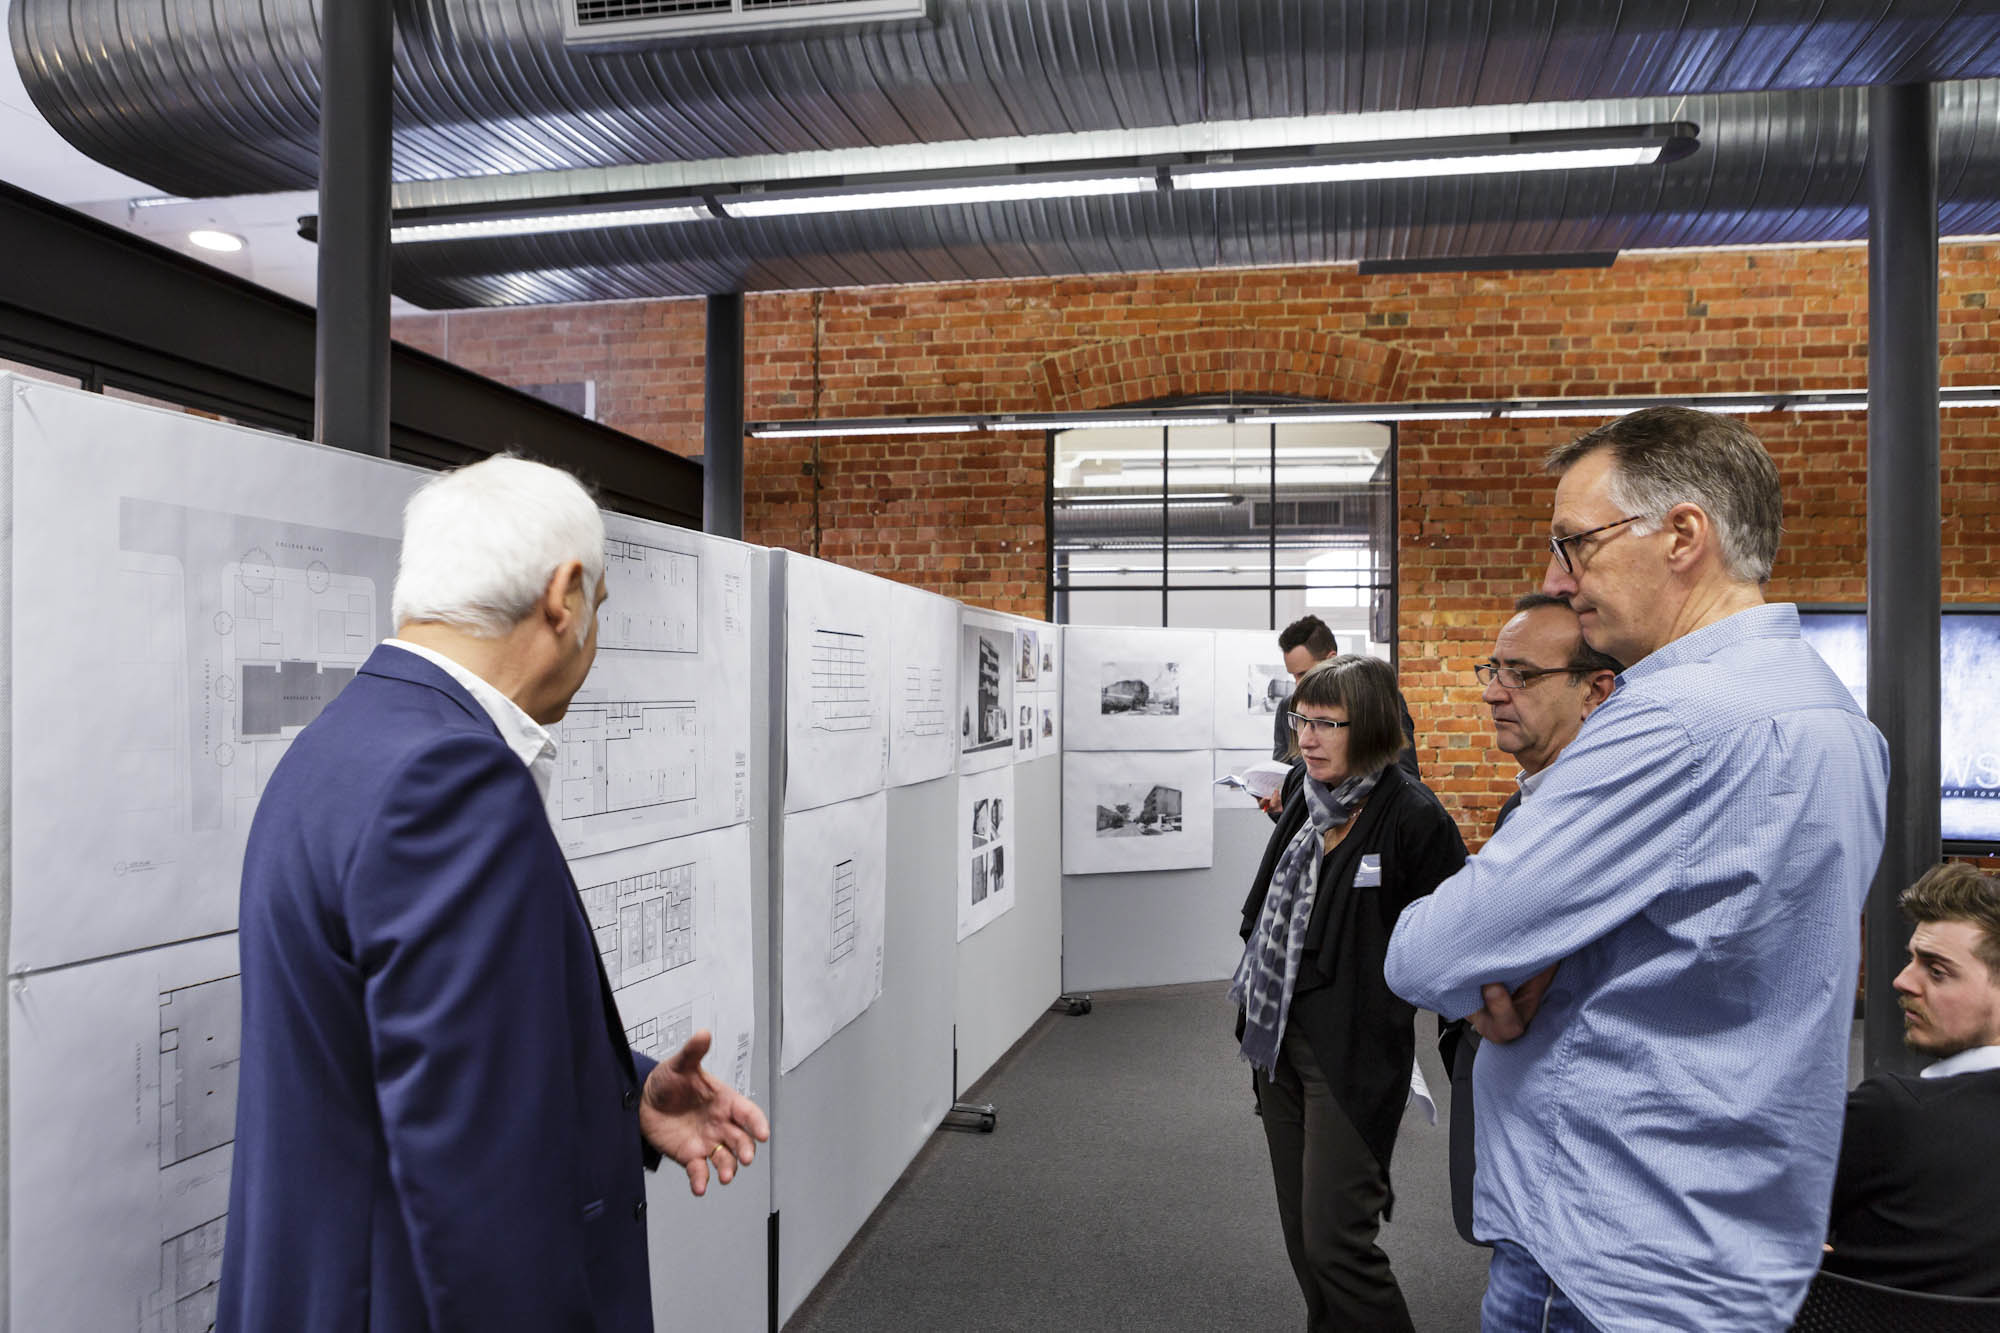 Design Review Panel members reviewing architectural drawings